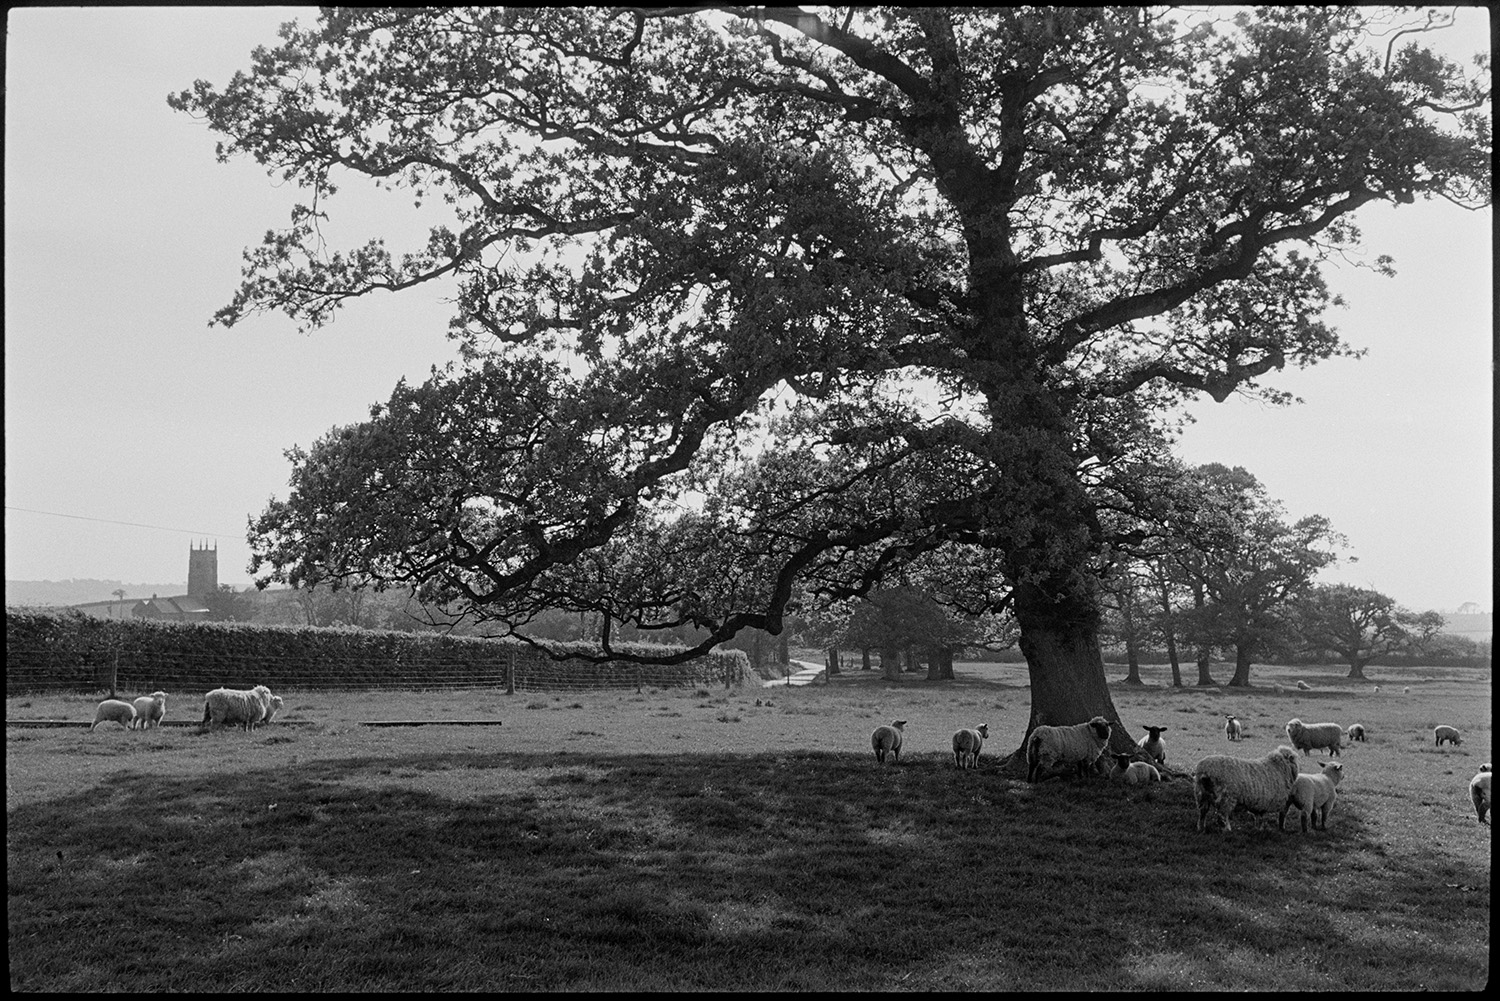 Sheep under oak trees.<br />
[A flock of sheep grazing under an oak tree in a large field in Warkleigh. The tower of the Church of St. John the Evangelist, Warkleigh is visible in the background.]